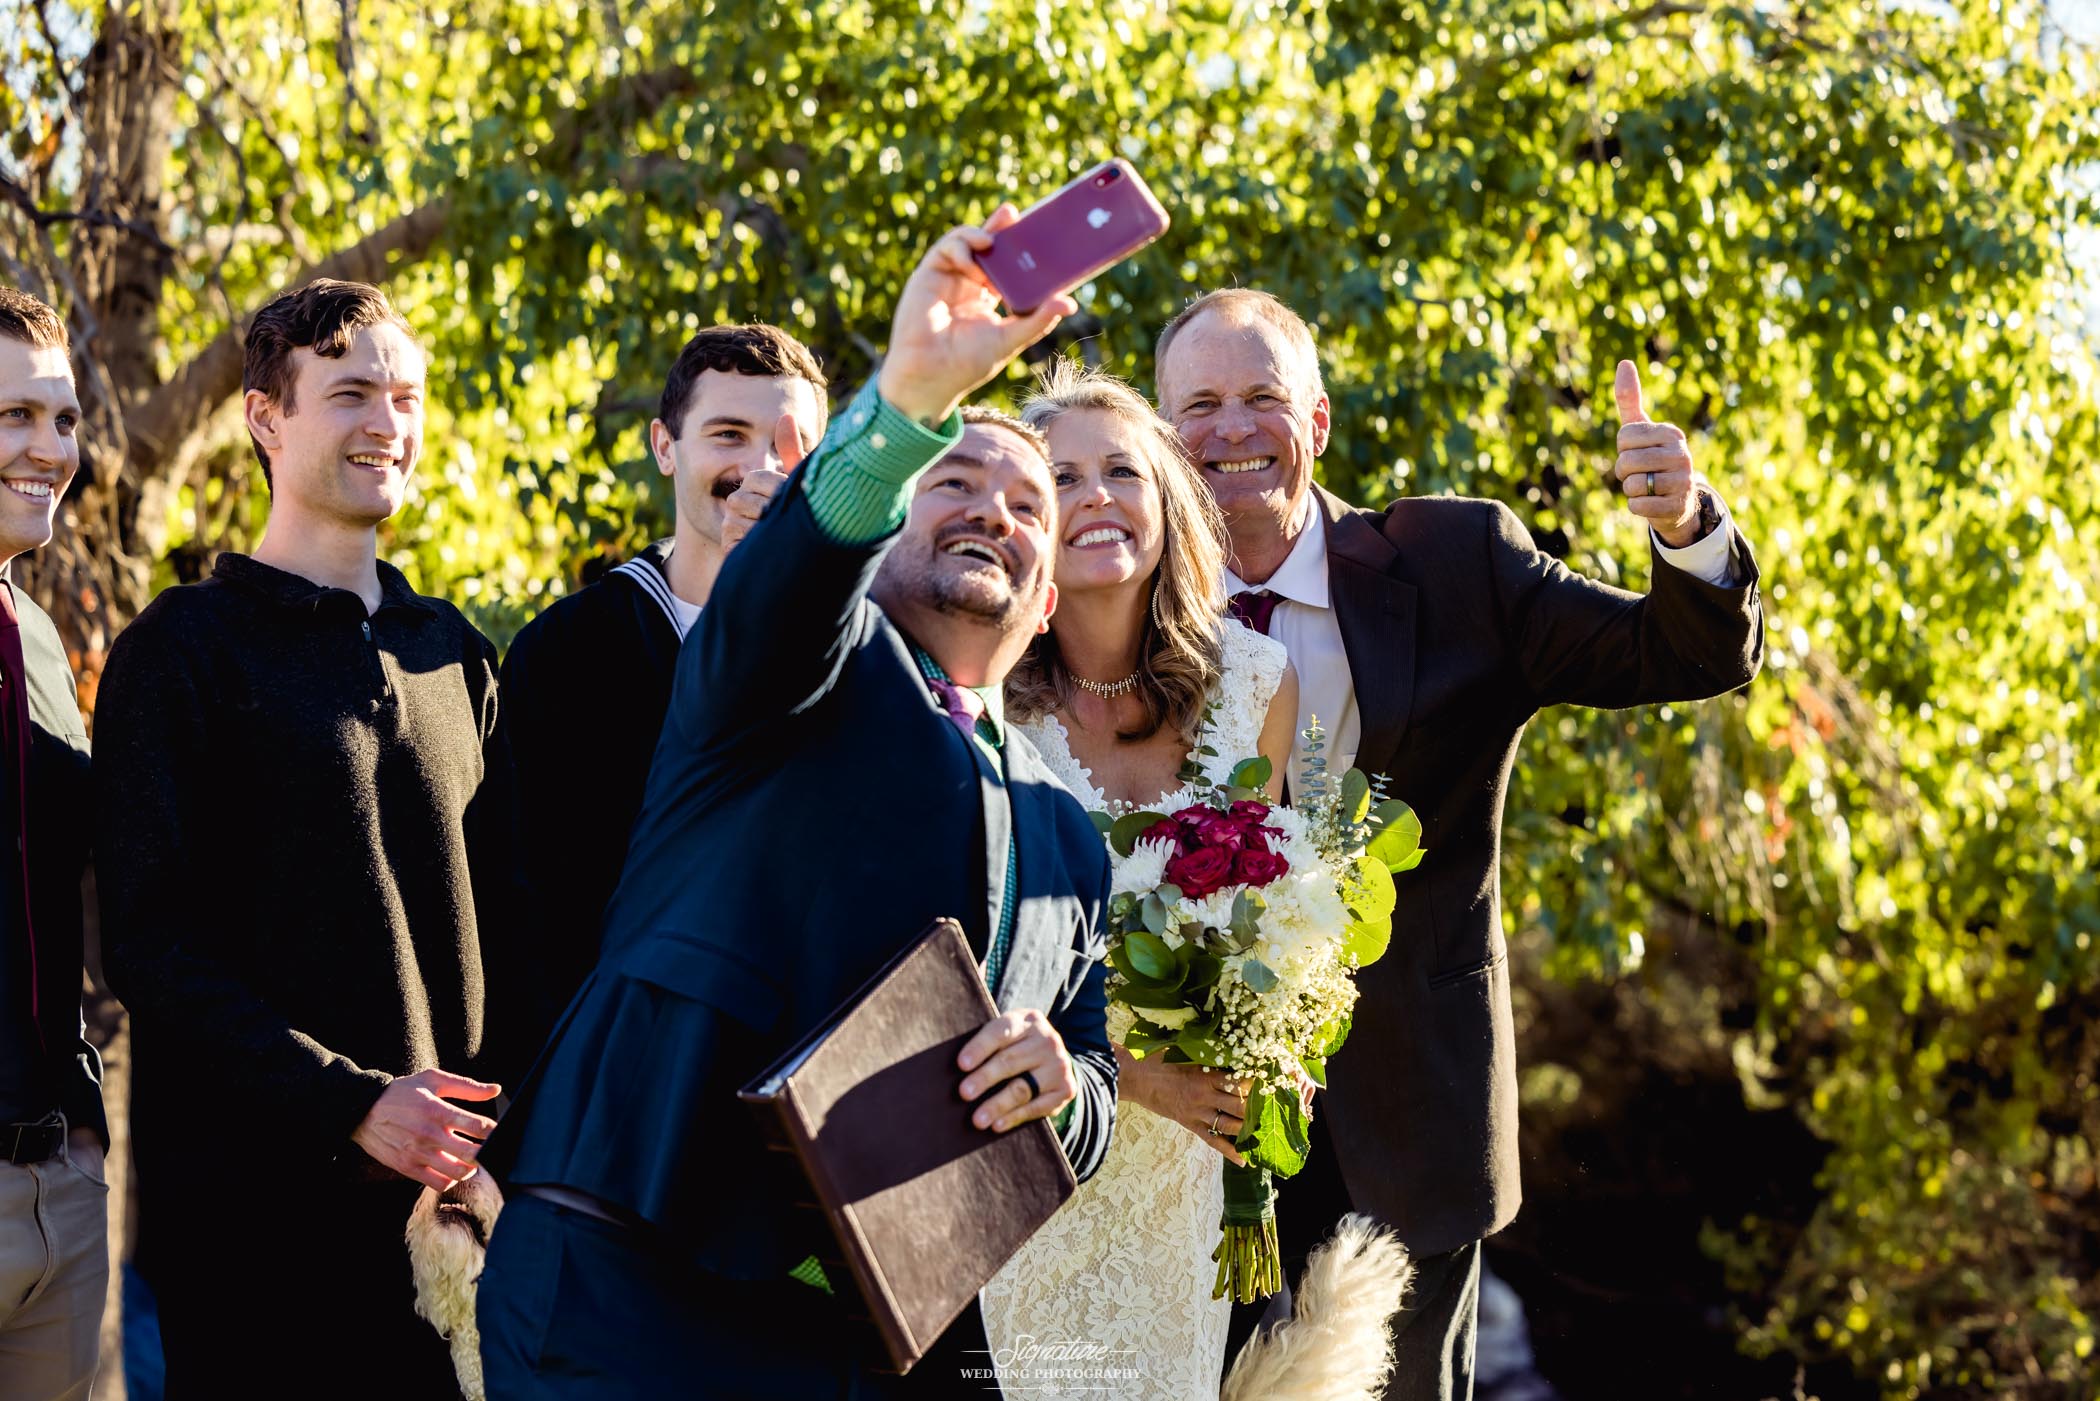 Officiant taking picture with bride and groom on cell phone